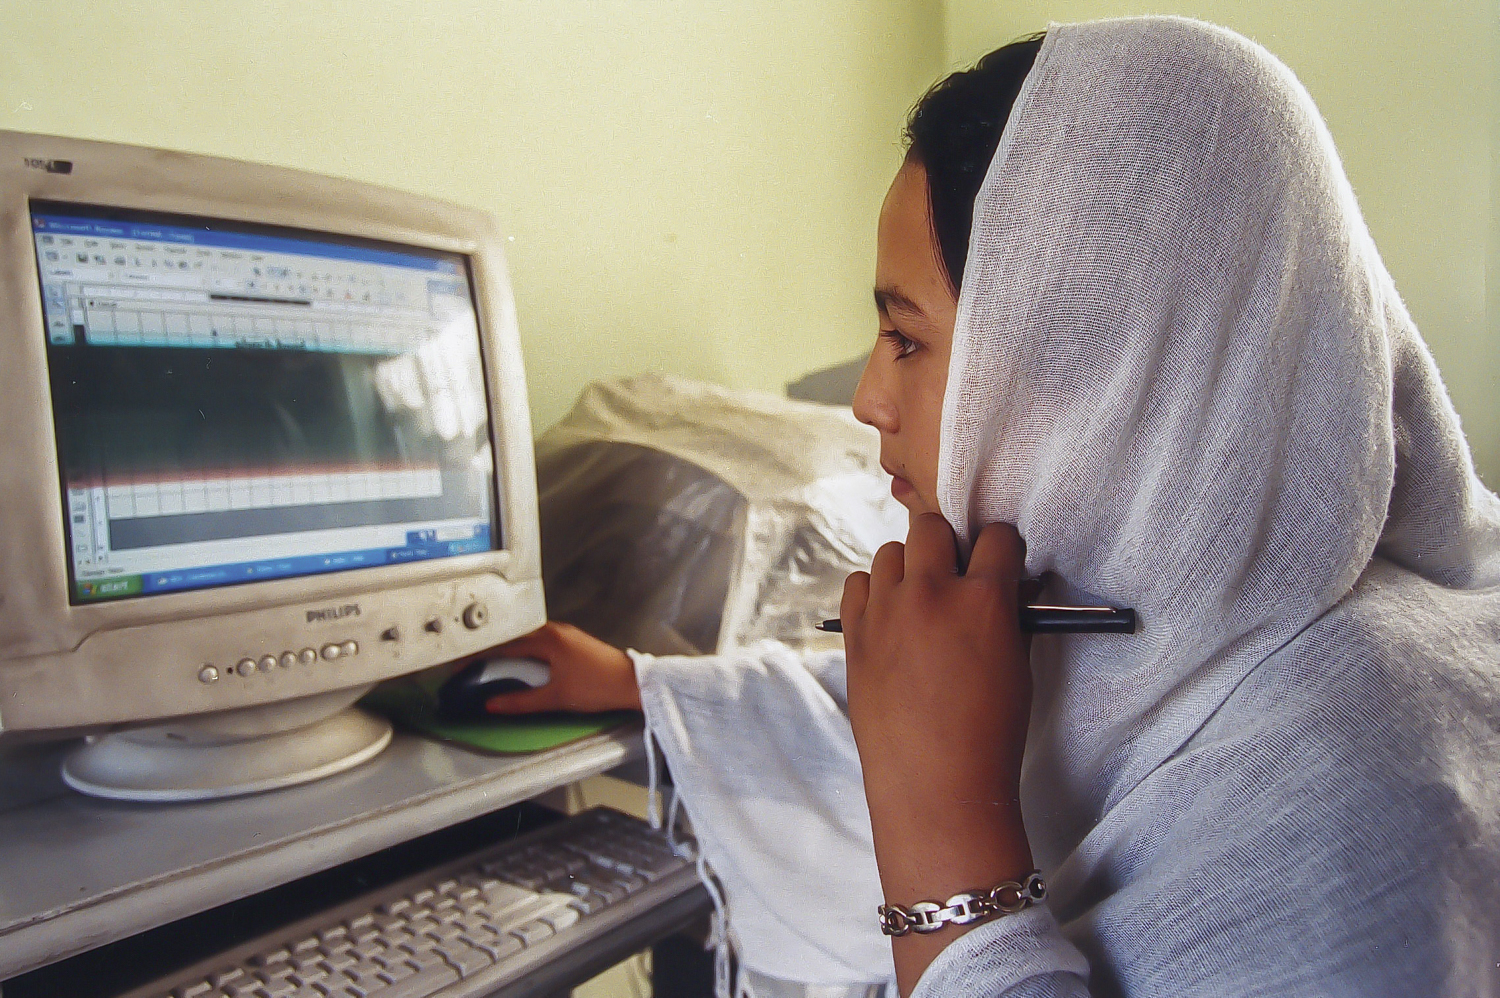 Afghanistan, Computercourse for women in Kabul